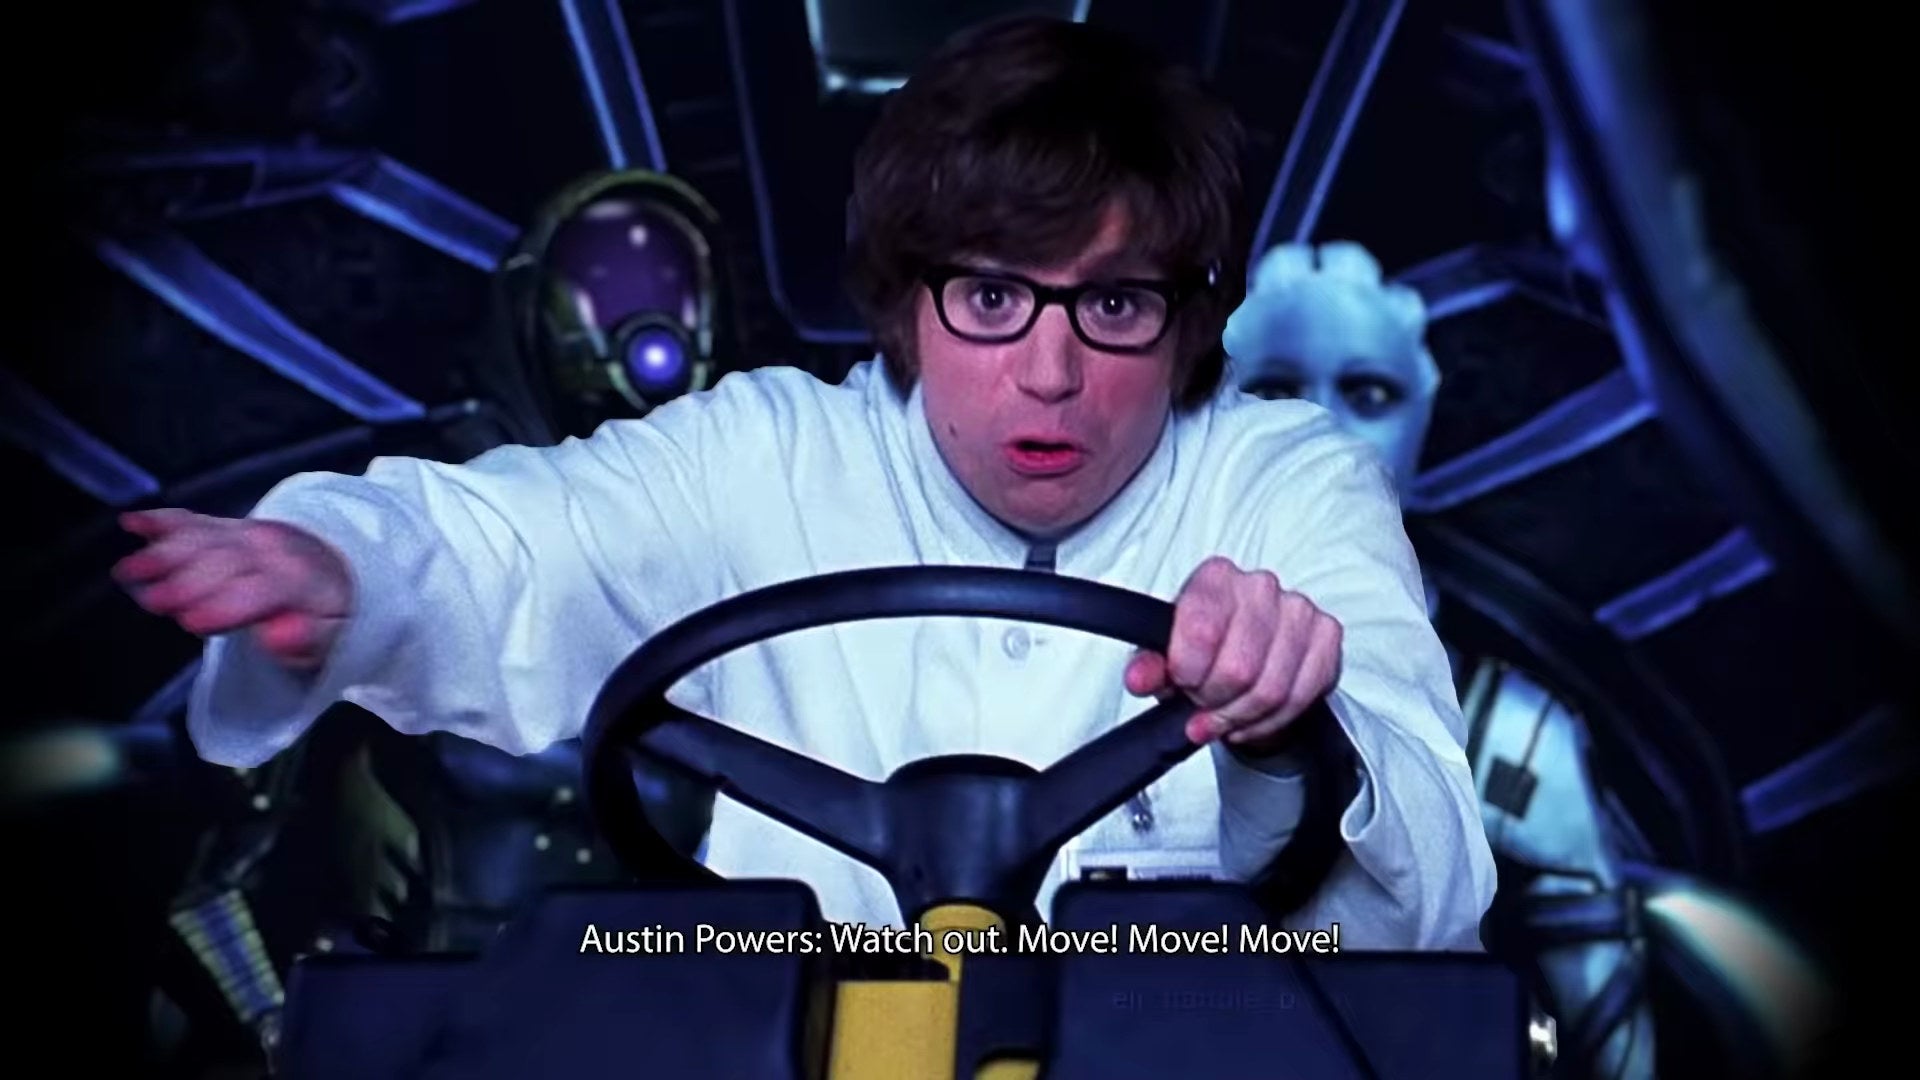 Austin Powers driving the Mako in a Mass Effect 2 edit video.